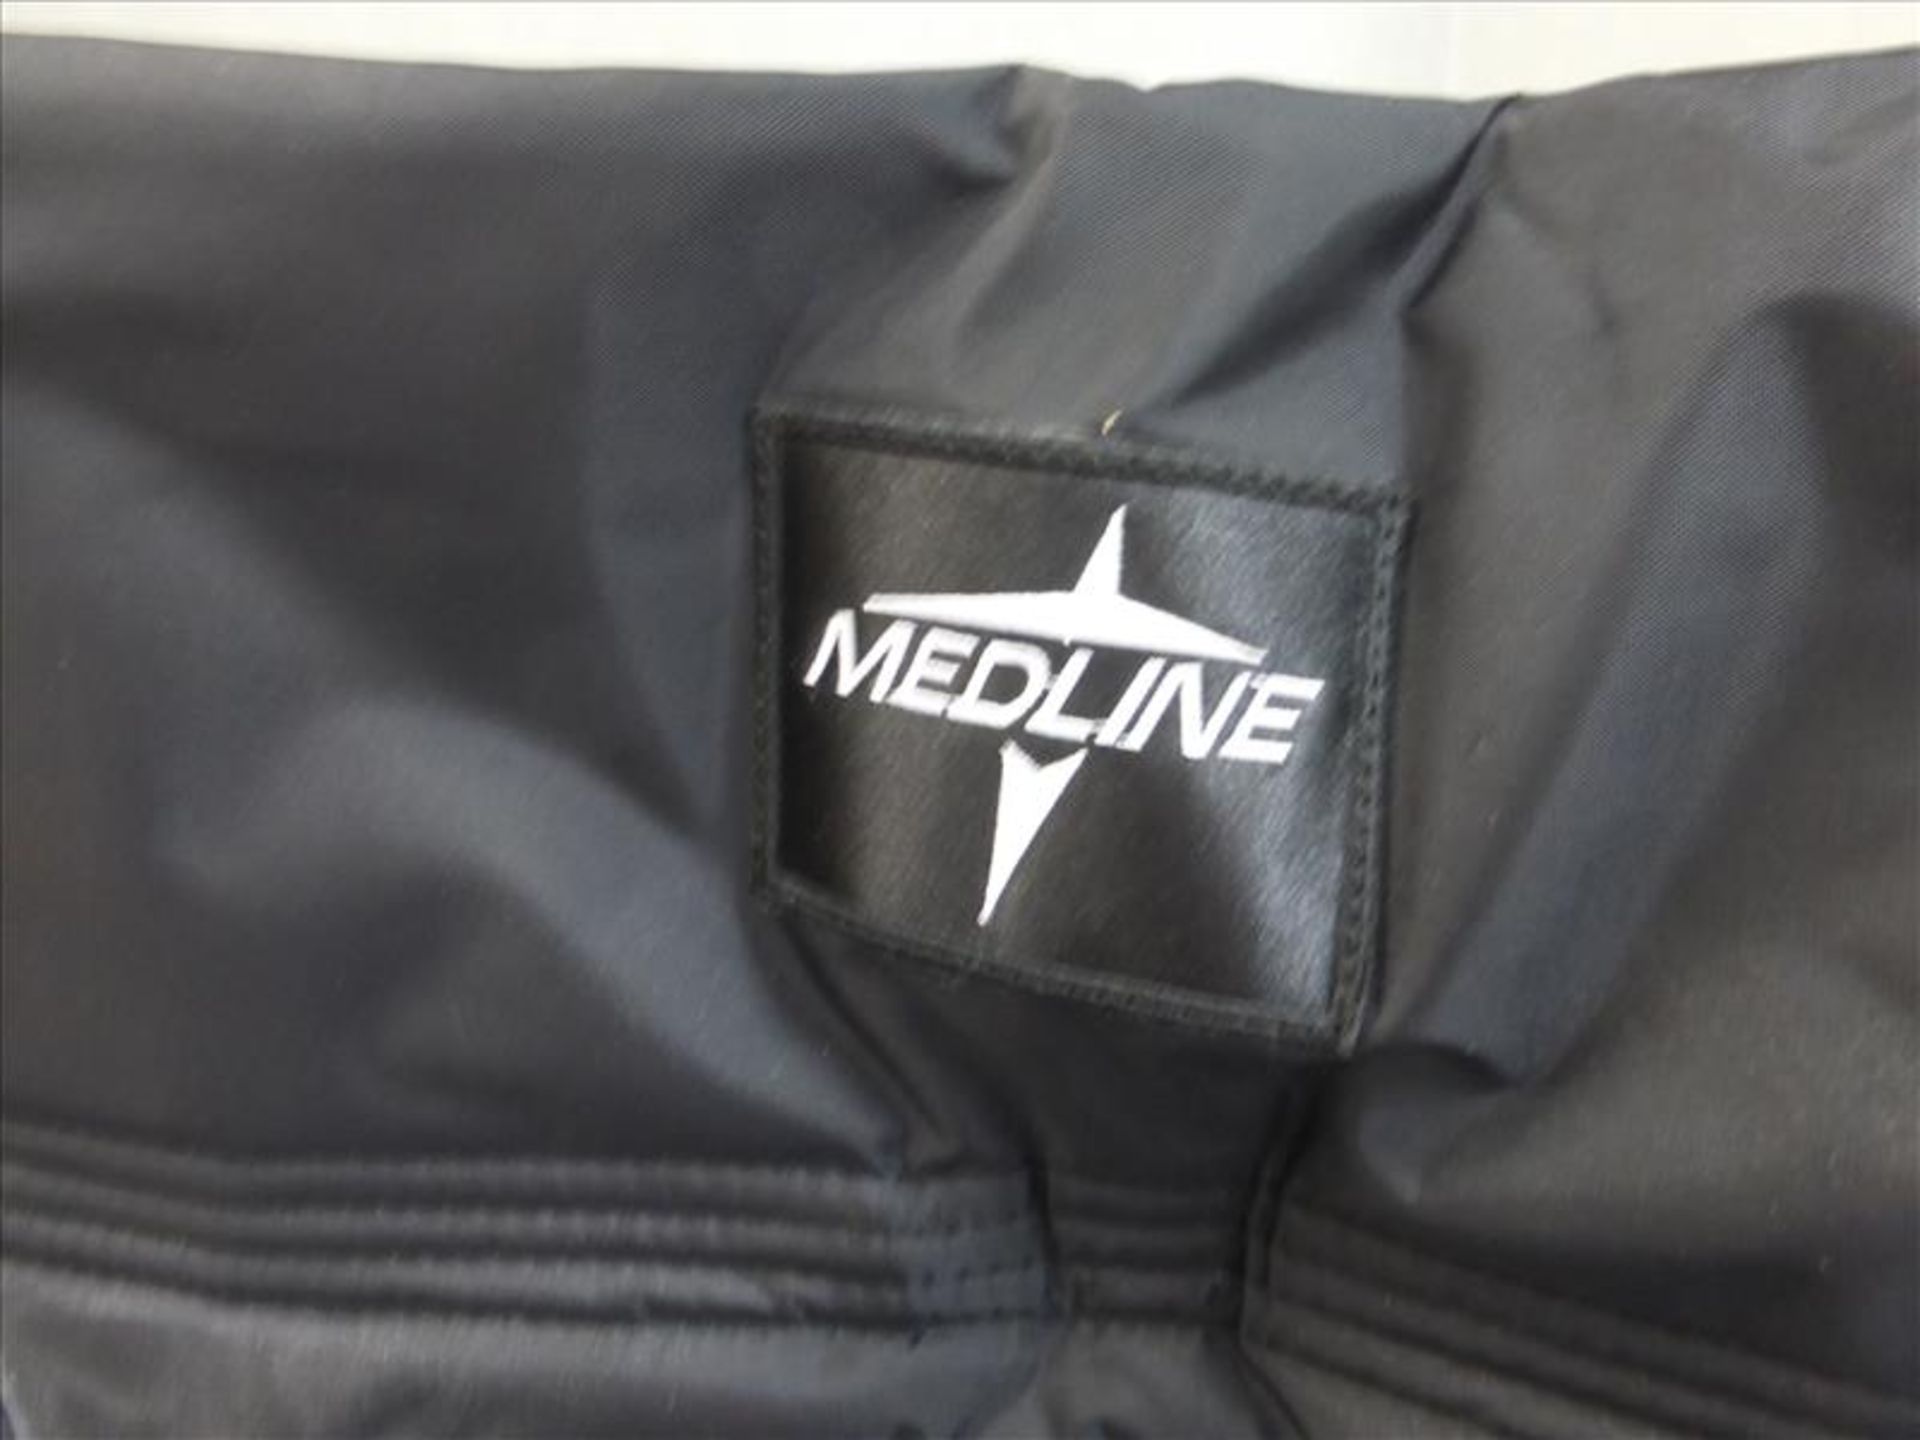 Medline foldable wheel chair. [Winner will be determined based on sum of bids on lots 1A to 73 vs - Image 2 of 2